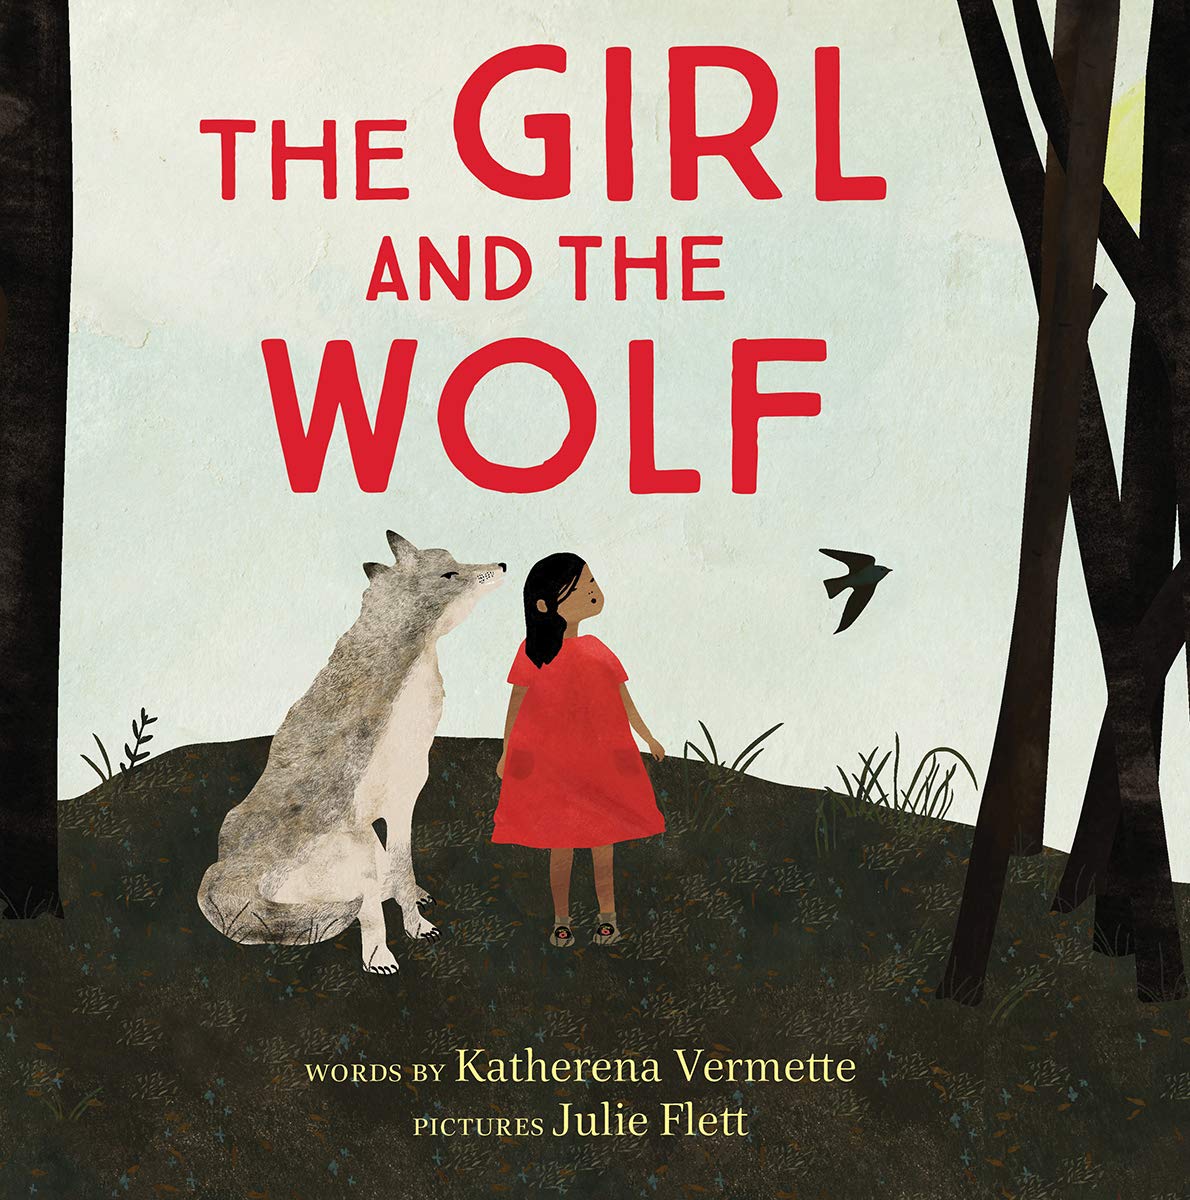 Book Cover of The Girl and the Wolf by Katherena Vermette